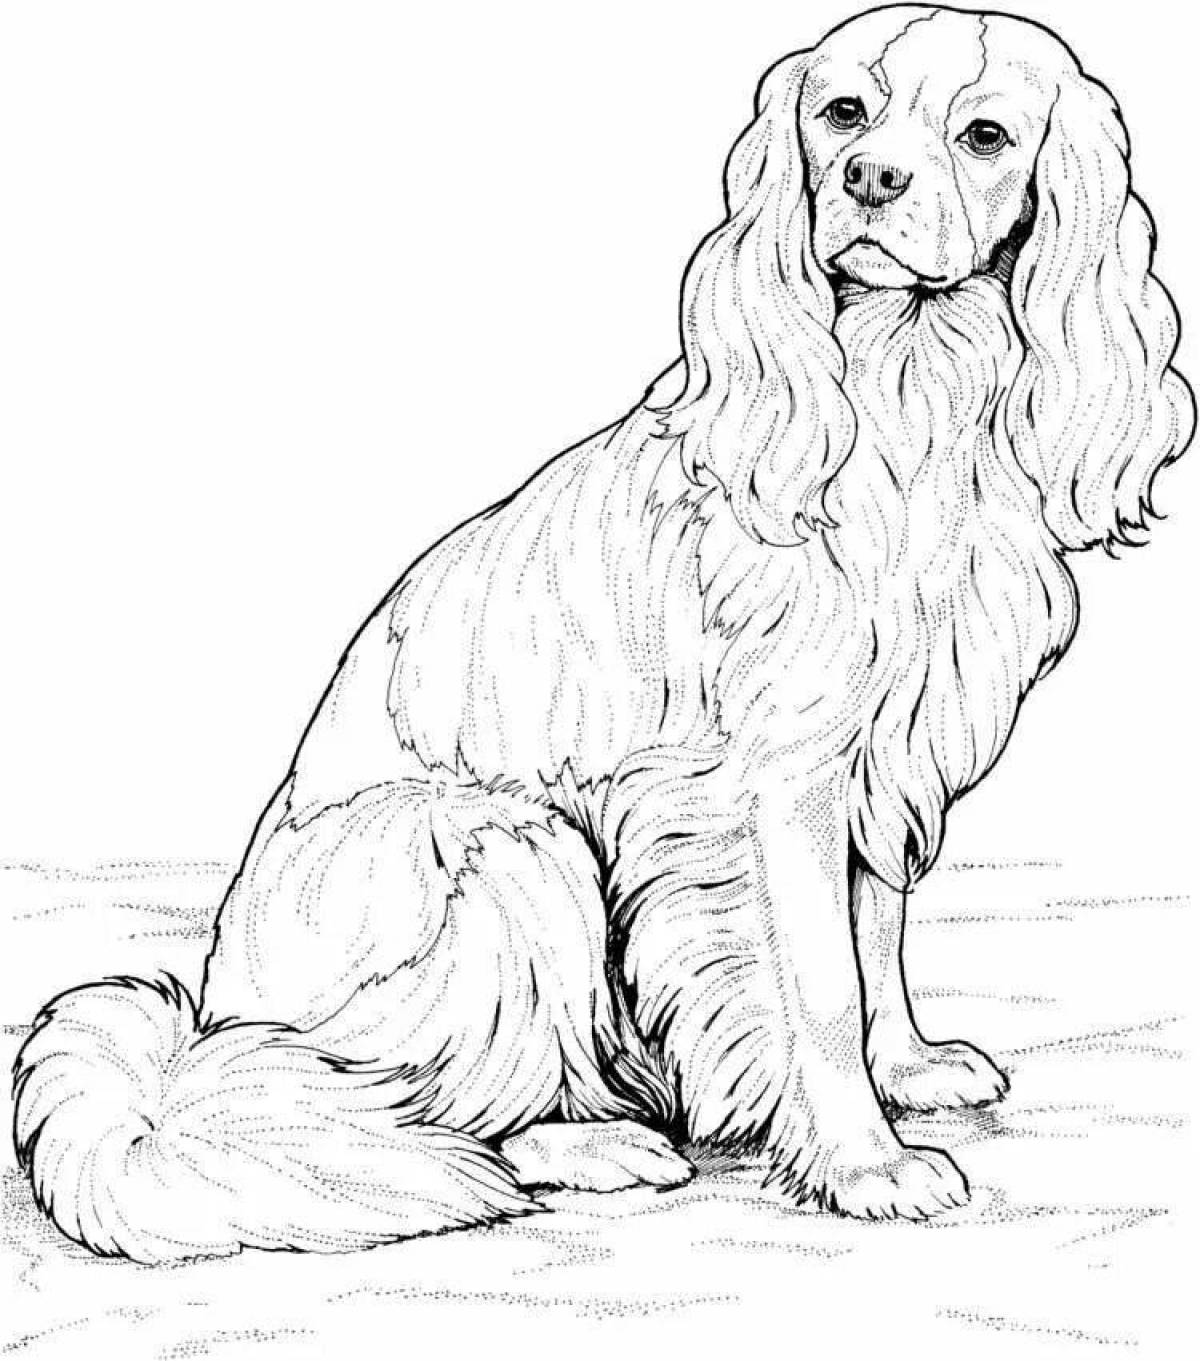 Delicate coloring of dog breeds